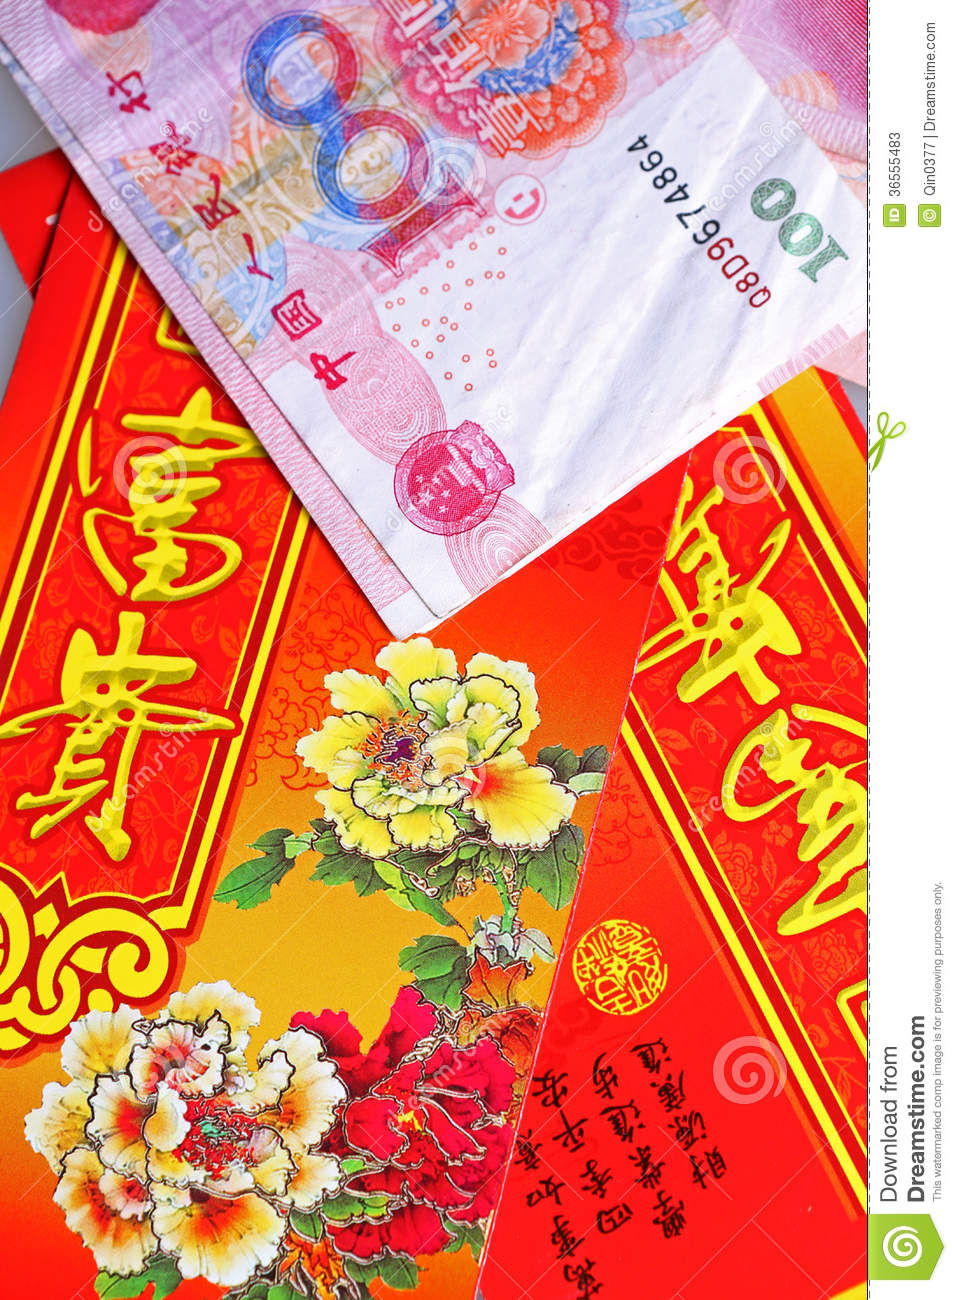 Blessing Red Envelopes Of China Stock Photos   Image  36555483